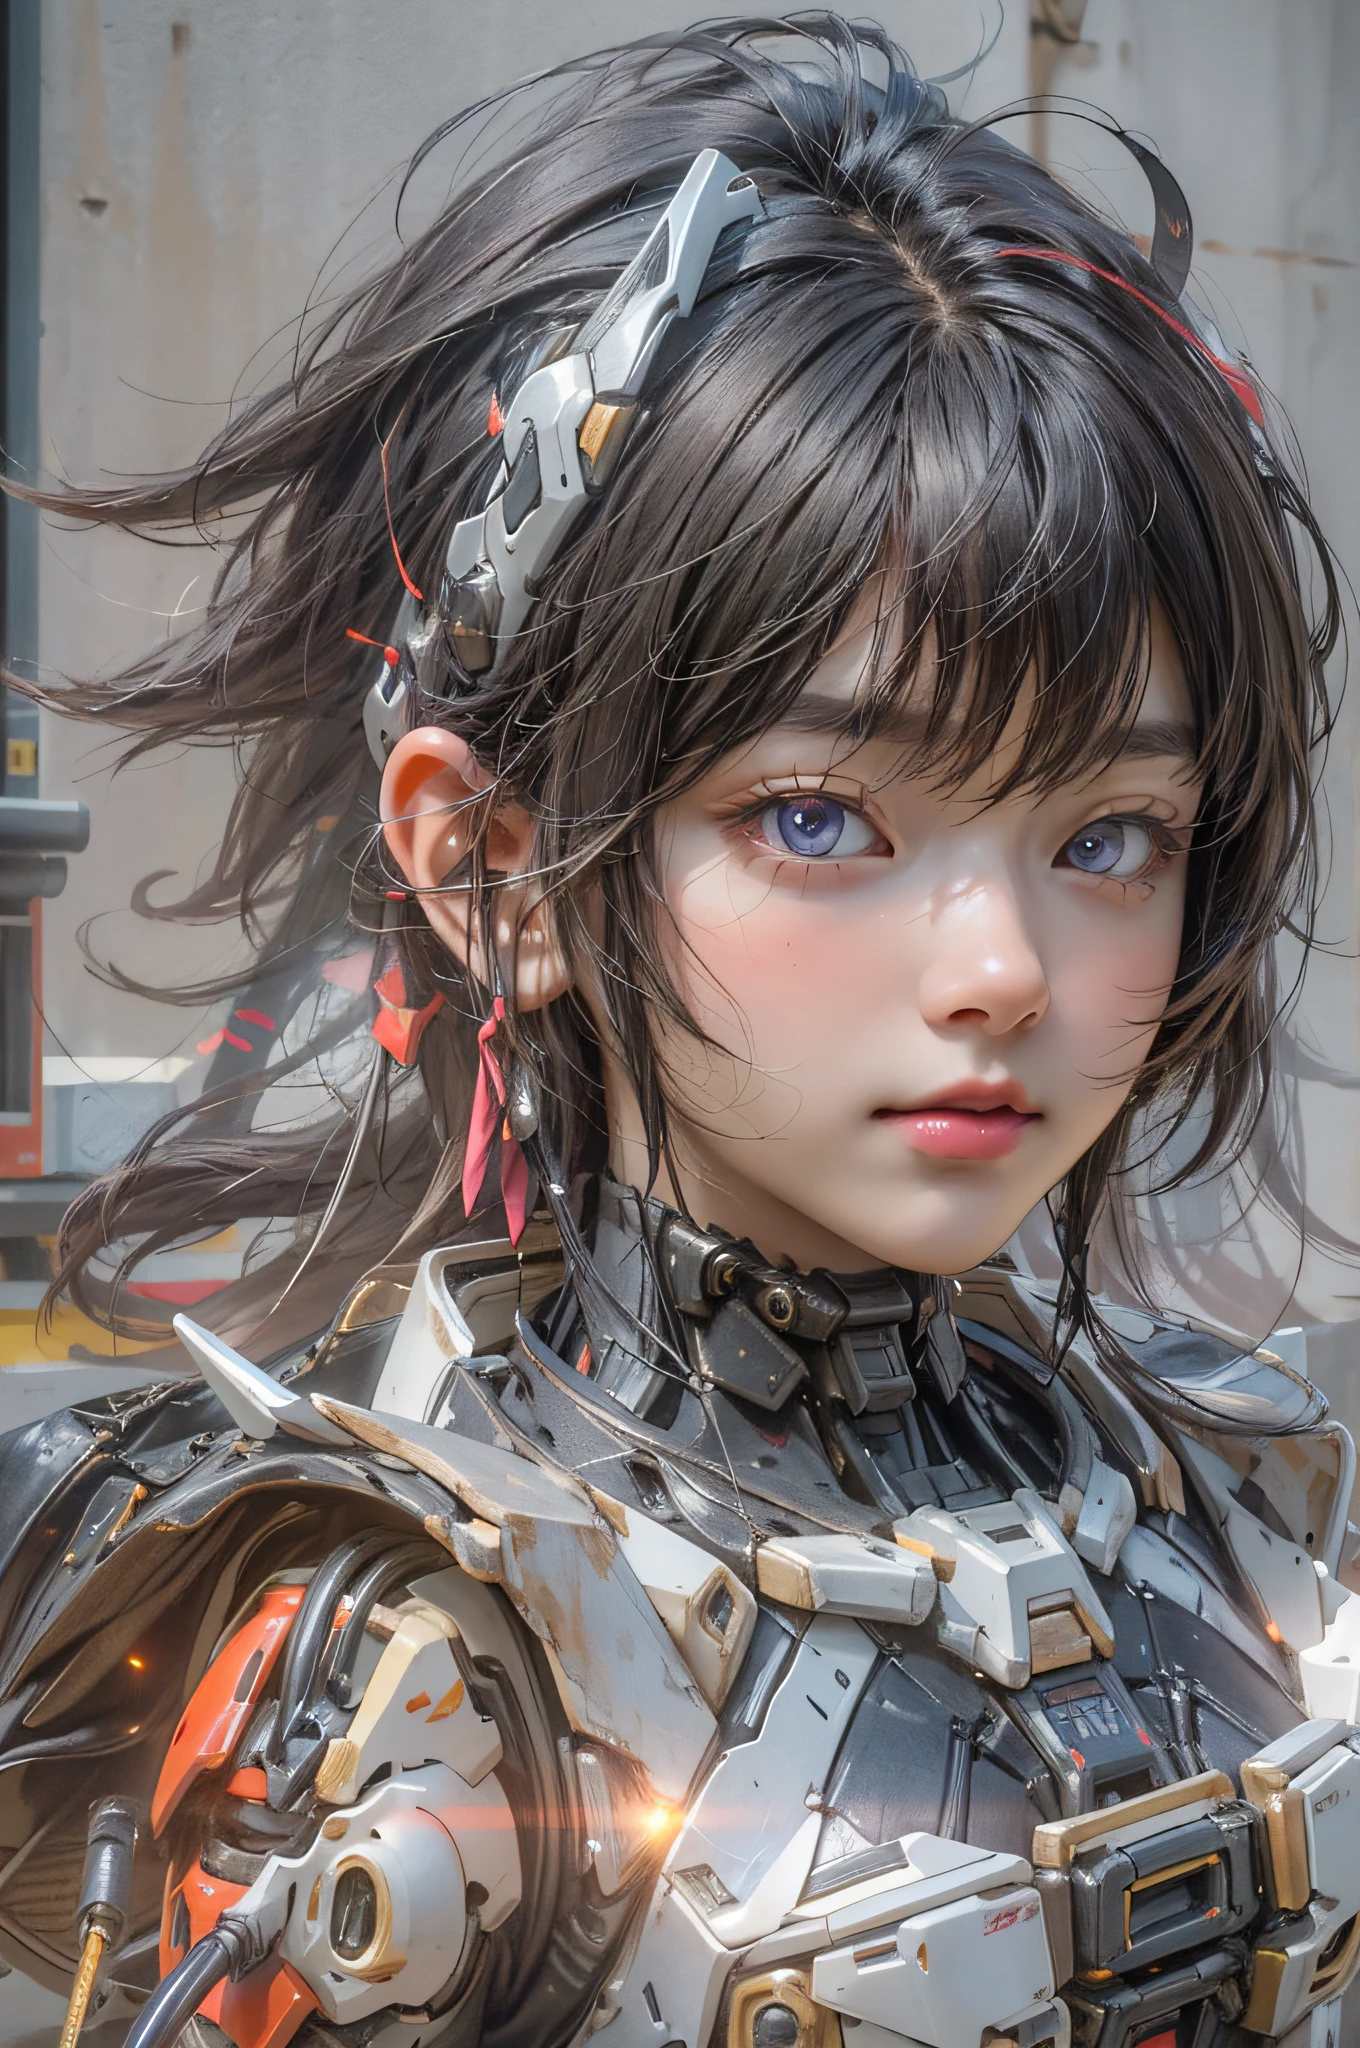 Top Quality, Masterpiece, Ultra High Resolution, (Photorealistic: 1.4), Raw Photo, 1 Girl, Black Hair, Glossy Skin, 1 Mechanical Girl, (Ultra Realistic Detail)), Portrait, Global Illumination, Shadows, Octane Rendering, 8K, Ultra Sharp, Big, Cleavage Exposed Raw Skin, Metal, Intricate Ornament Details, Japan Details, Very intricate details, realistic light, CGSoation trend, purple eyes, glowing eyes, facing the camera, neon details, mechanical limbs, mechanical, standing, wires and cables connecting to the head, gundam, small LED lamps, neon light, 1 Mecha, sharp eyes, human mouth, mecha body, mechanical body, gundam suit,, great hair, straight body mecha, mecha, neon body, anime girl with a futuristic body and a gun in her hand, portrait anime space cadet girl, cyberpunk anime girl mech, guweiz on artstation pixiv, mechanized soldier girl, guweiz on pixiv artstation, detailed digital anime art, cute cyborg girl, girl in mecha cyber armor, perfect android girl, anime mecha aesthetic, Extremely cute human eighteen year old man face, human torso, human abs, human abdomen, human hips, robotic arms, mechanical legs, arms and legs with hard white shiny shell and black joints, very beautiful and male, short, , small, small, medium bust, cleavage display, flat belly display, partial helmet with antenna on the ear, black robot joints, very stylish, award-winning product design, black rubber tights, Shiny white metal cuirass opens at cleavage and belly, white metal rump with folds, armor with stylish, glowing trim, mecha fox tail